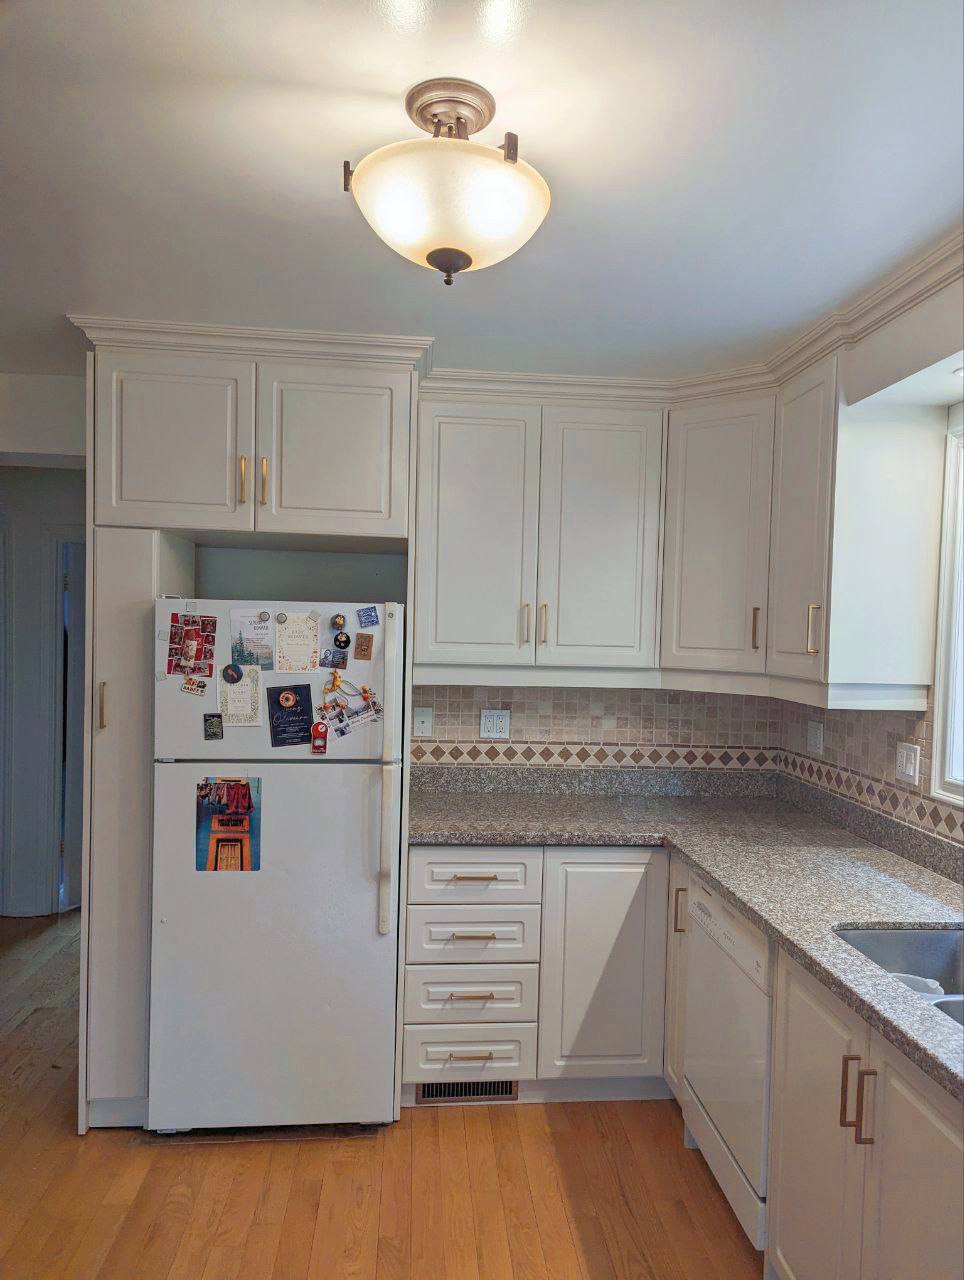 After of kitchen cabinet painting in Junction Toronto. Painted kitchen cabinets in off-white Wind's Breath Benjamin Moore